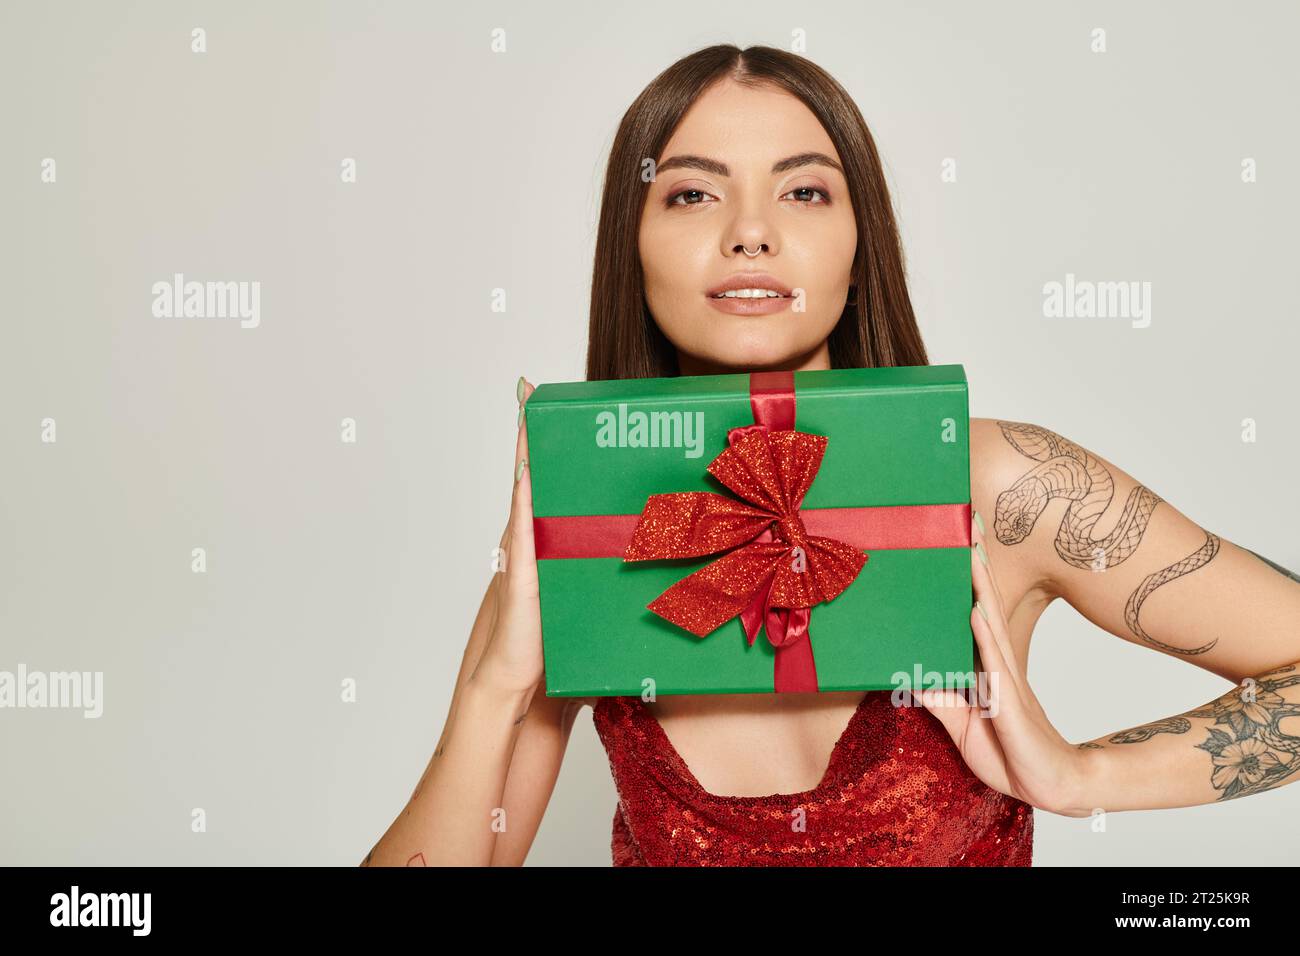 jolly woman with pierced nose holding present under her chin on ecru backdrop, holiday gifts concept Stock Photo